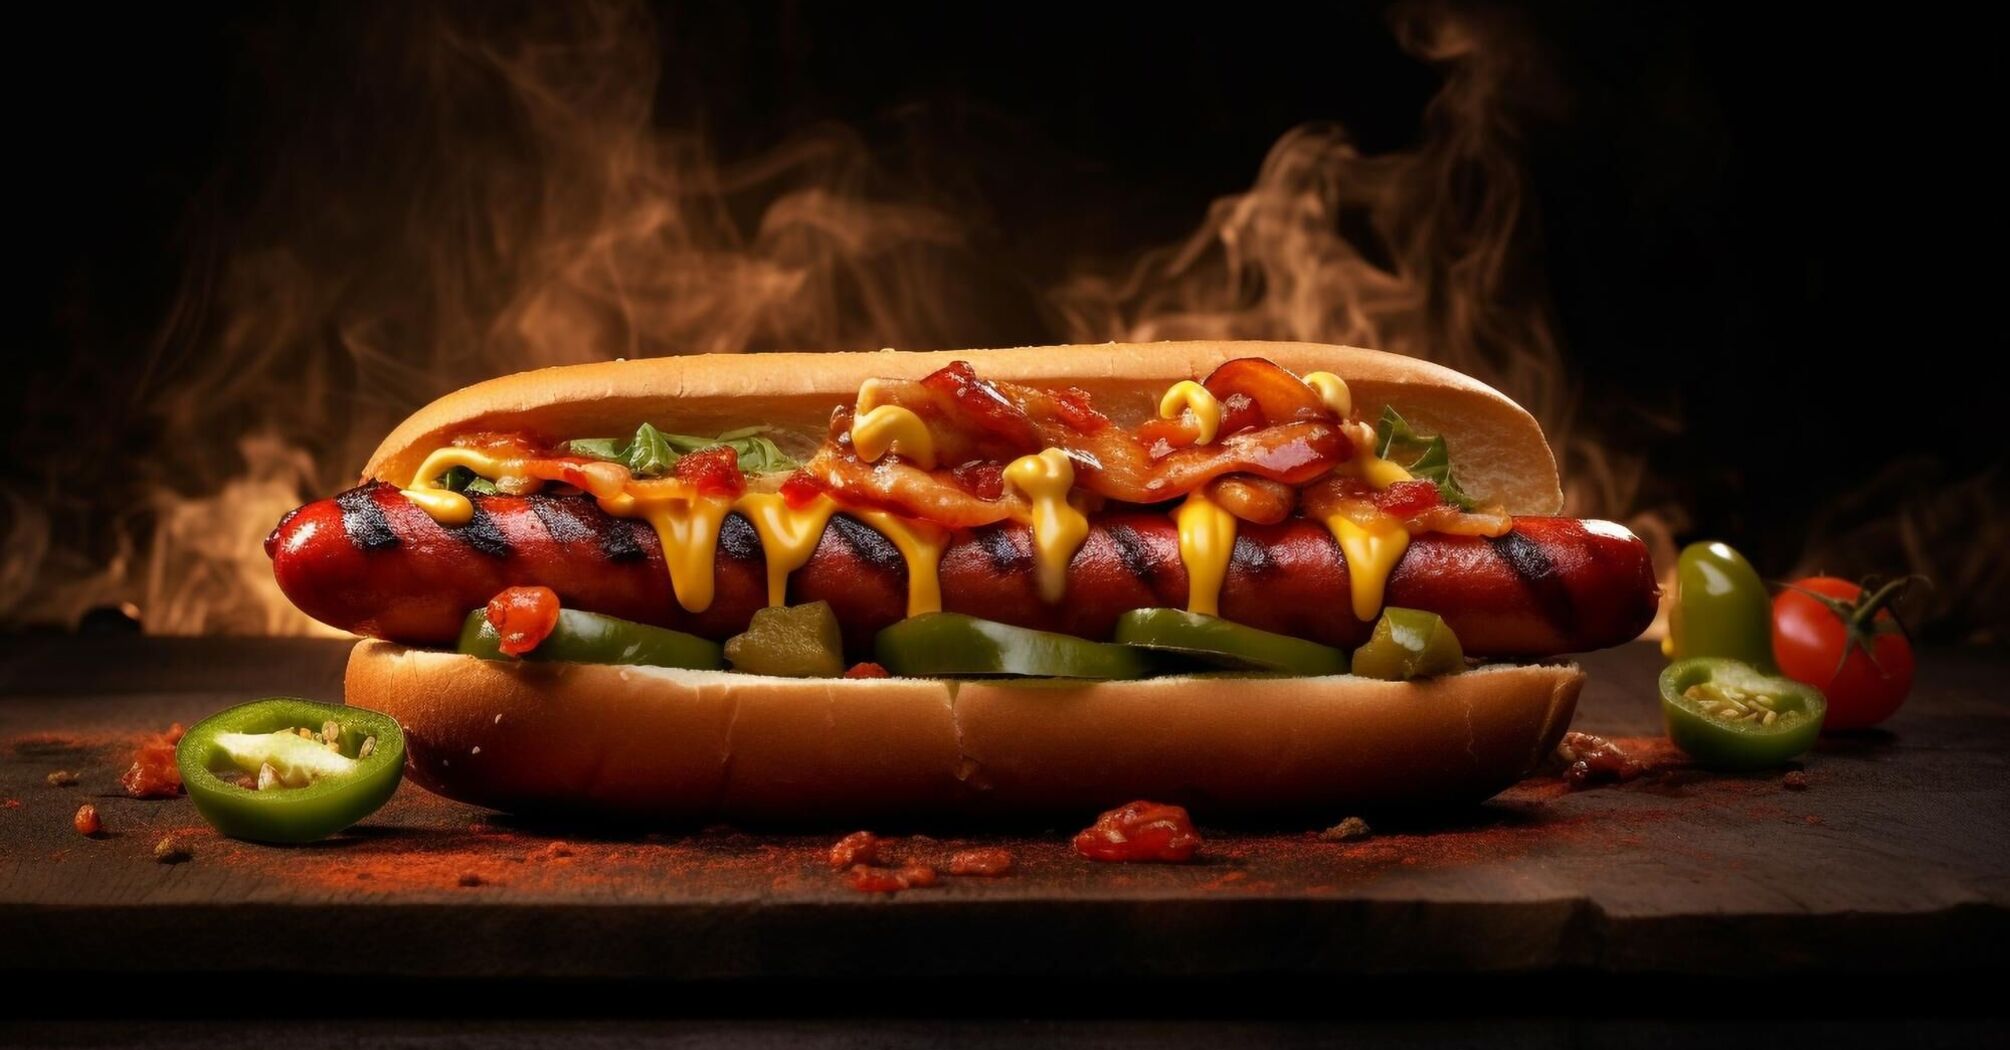 The best hot dogs in Chicago: 7 places according to gourmet reviews